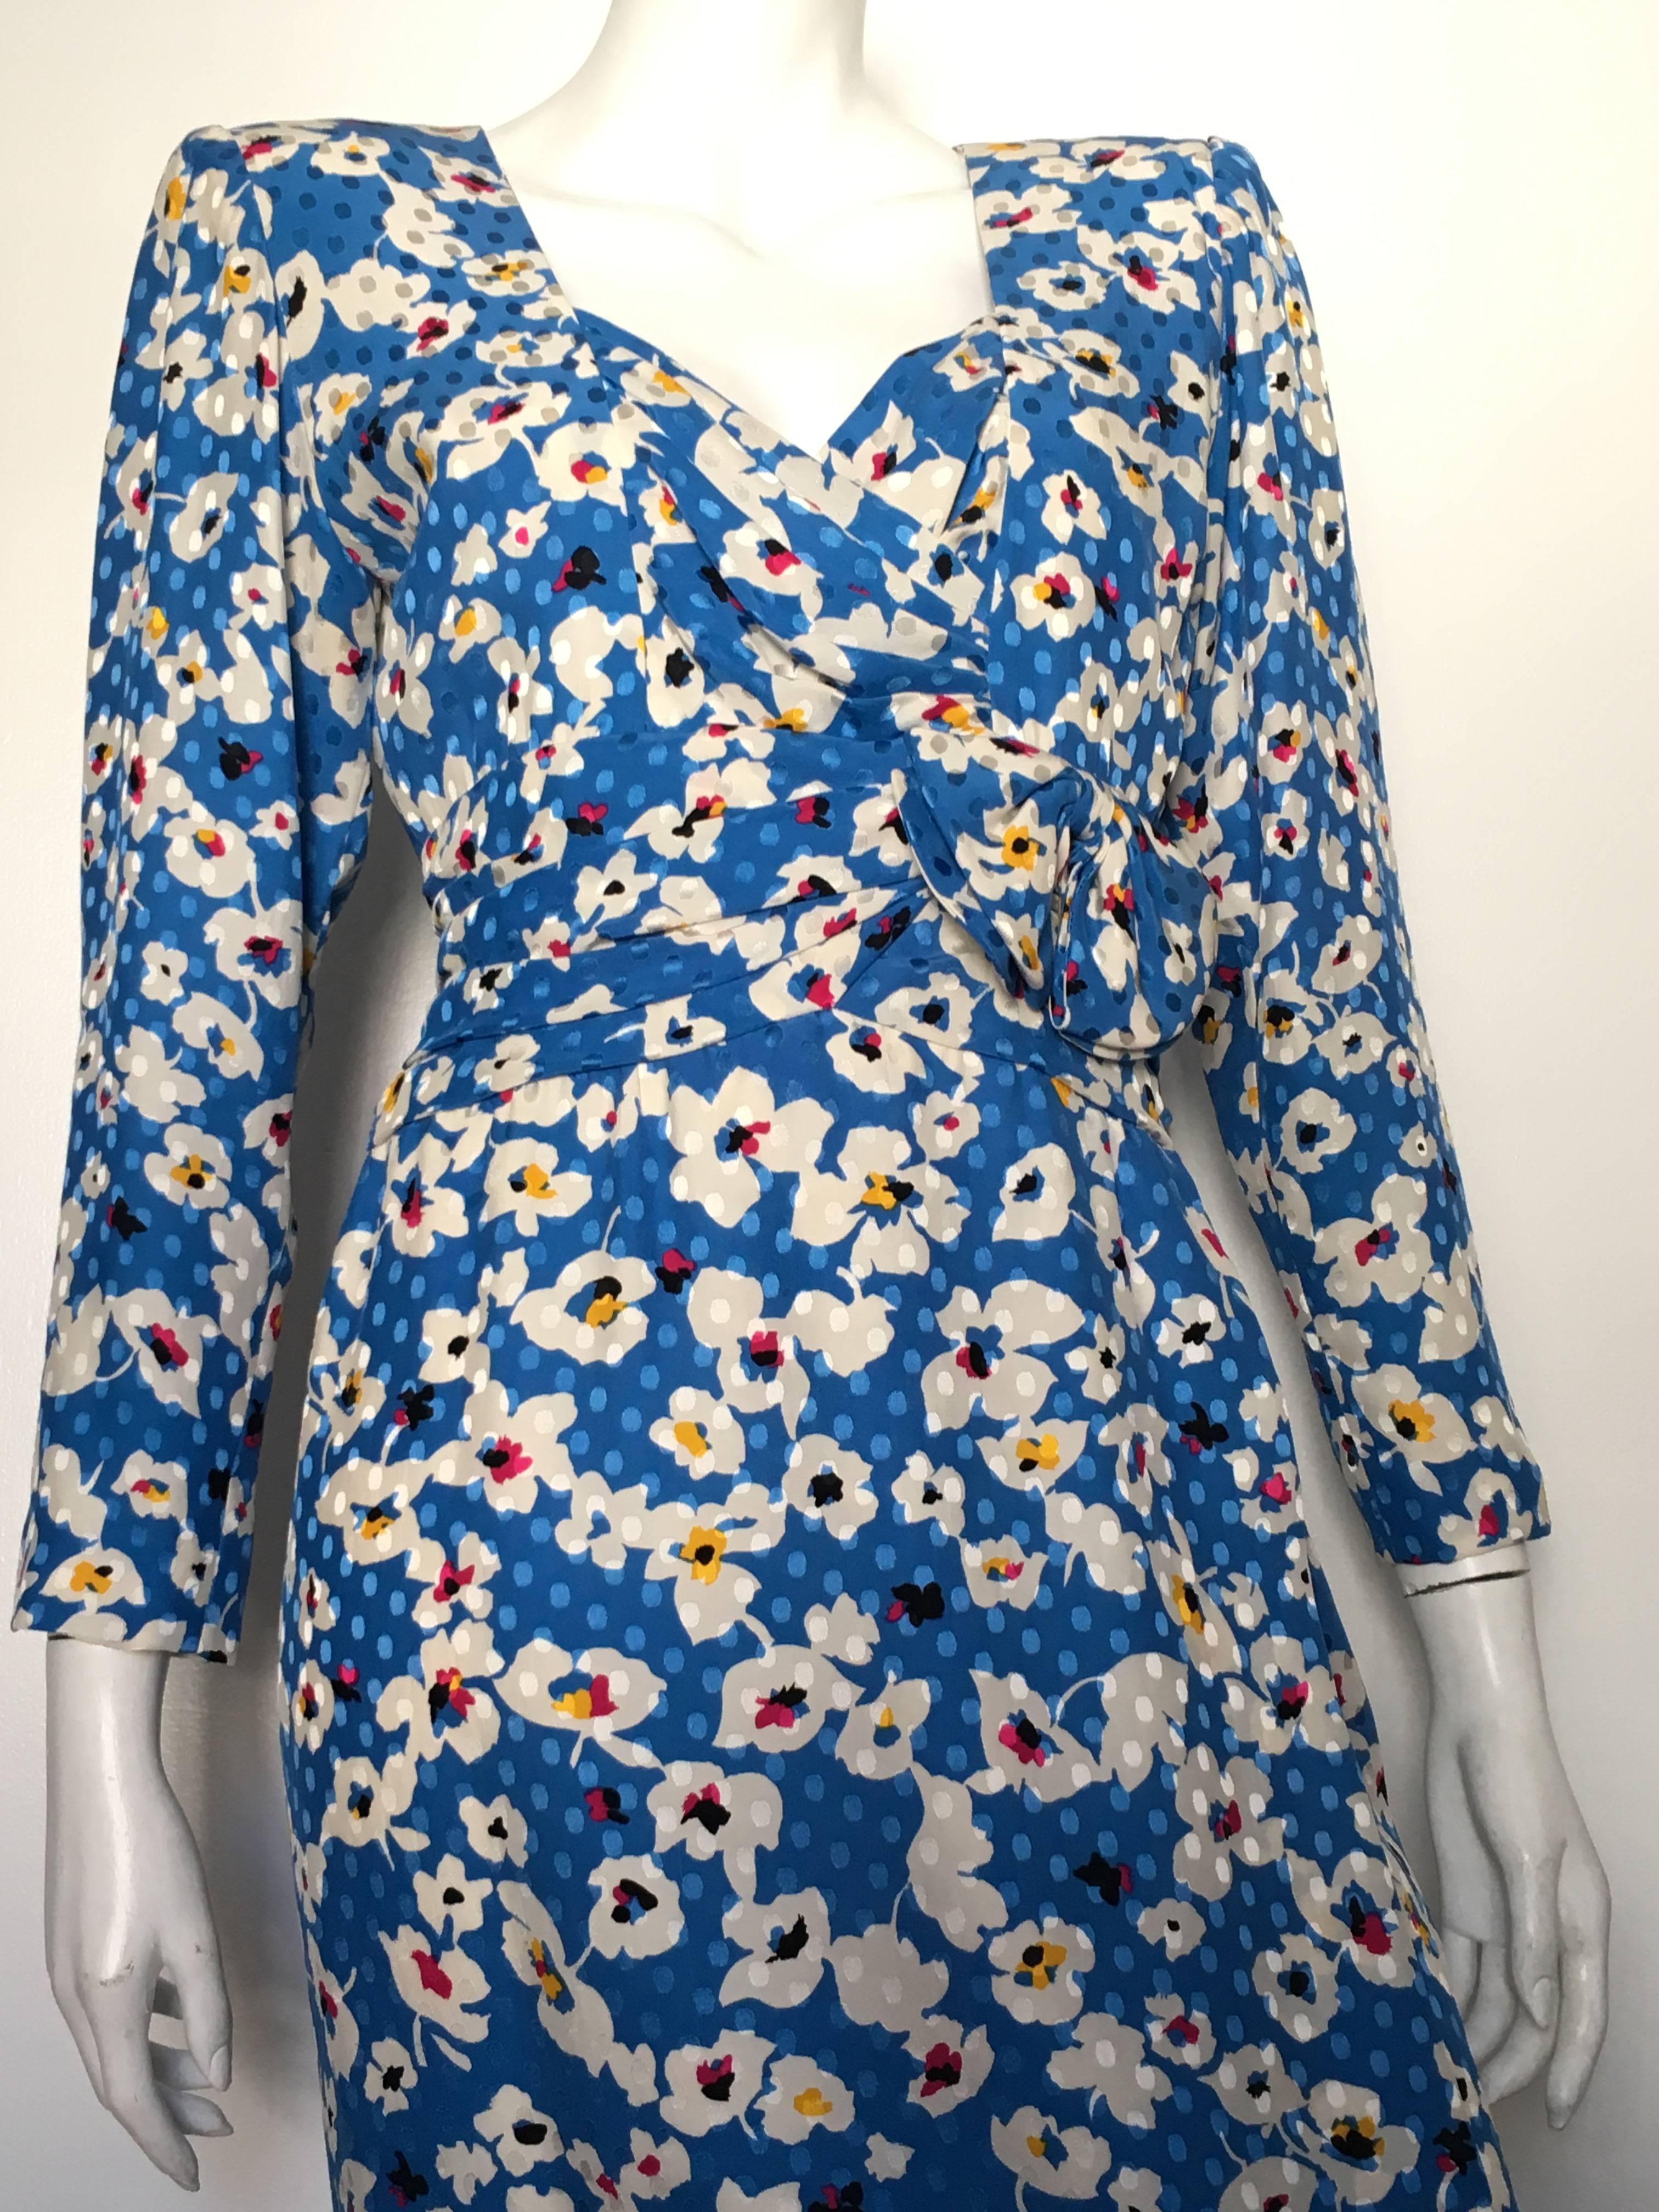 Nina Ricci 1980s silk floral sheath dress is a vintage French size 40 and fits like an USA size 4/6.  Ladies please grab your trusted tape measure so you can properly measure your bust, waist & hips to make certain this will fit your lovely body. 